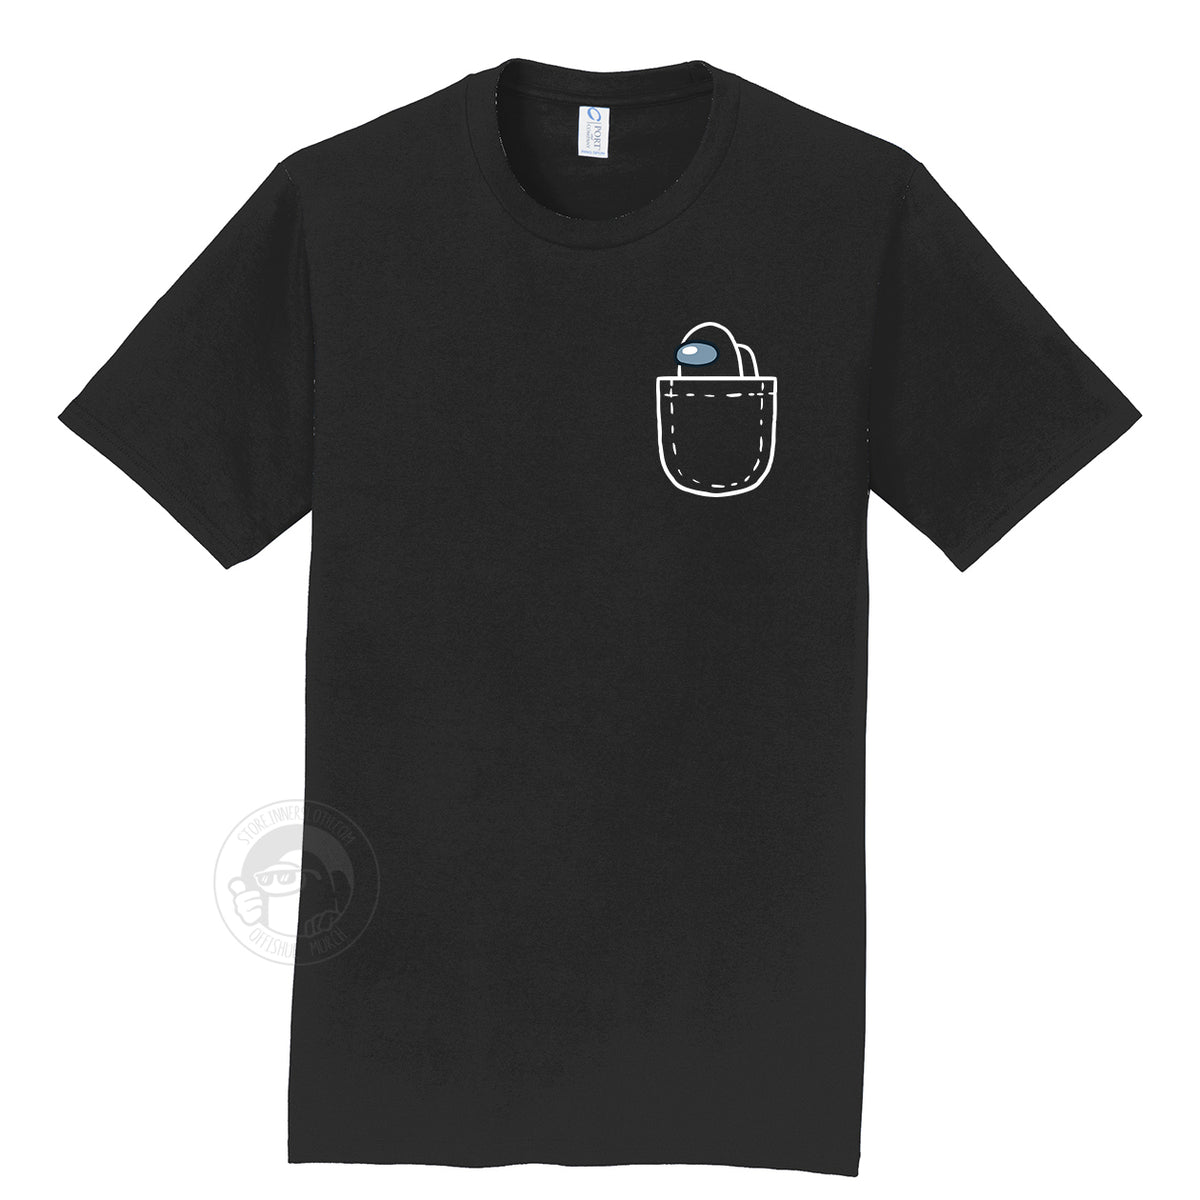 A product photograph of the Among Us: Mini Crewmate Pocket Tee in black. The shirt art depicts a fake pocket and a small crewmate peeking out of it. The crewmate is the same color as the rest of the shirt.